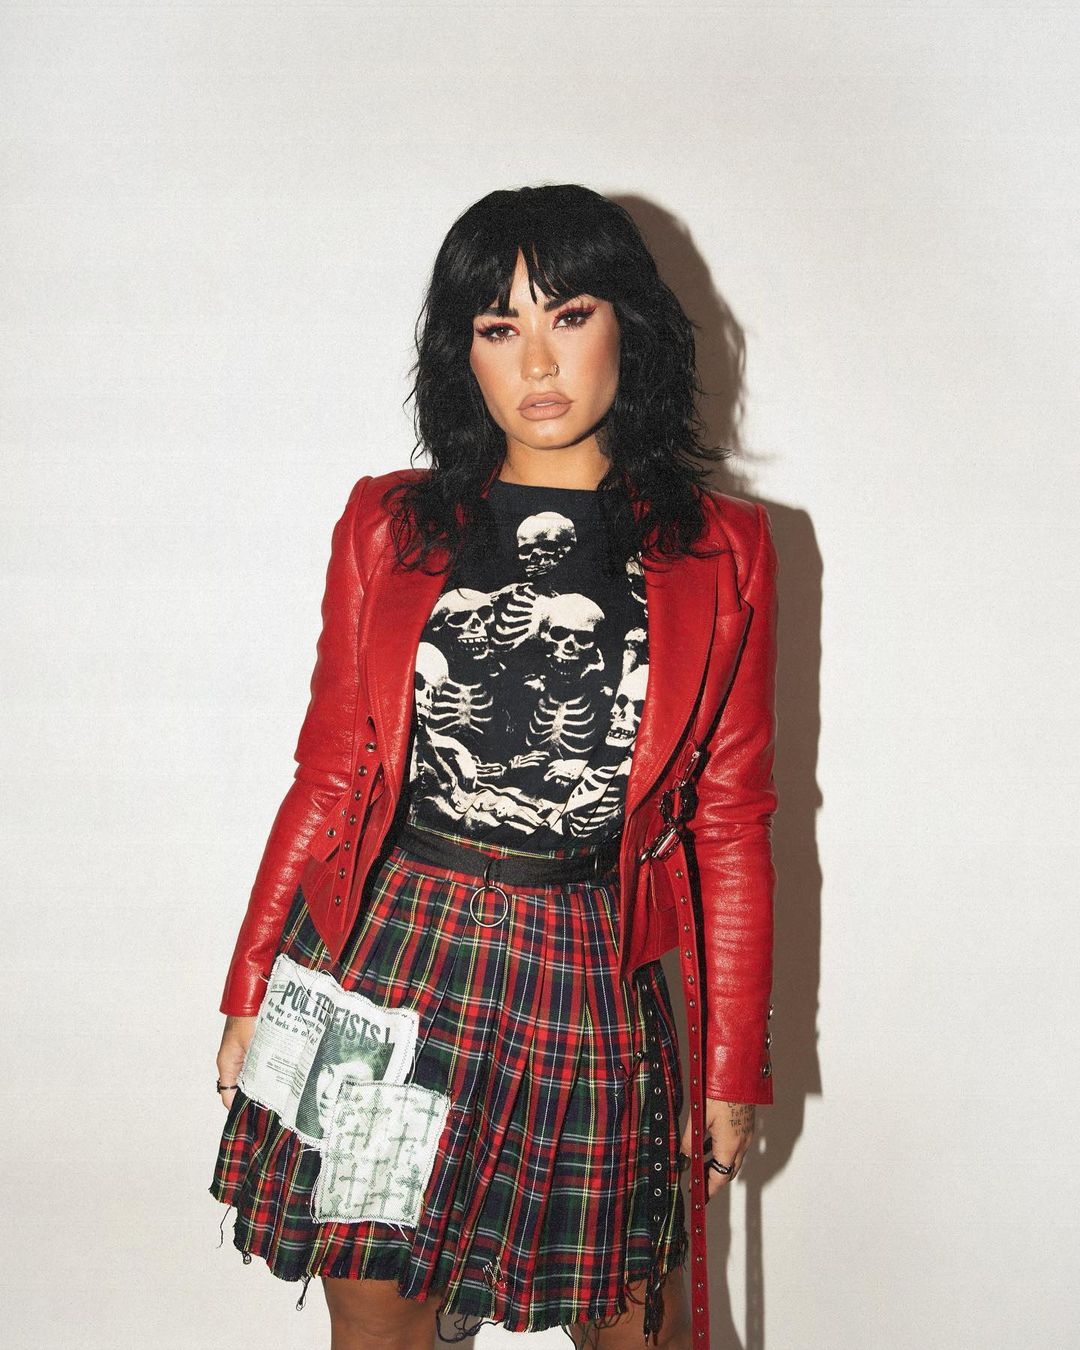 Sassy Demi In Printed Black Tee & Checkered Skirt Topped With Red Leather Jacket